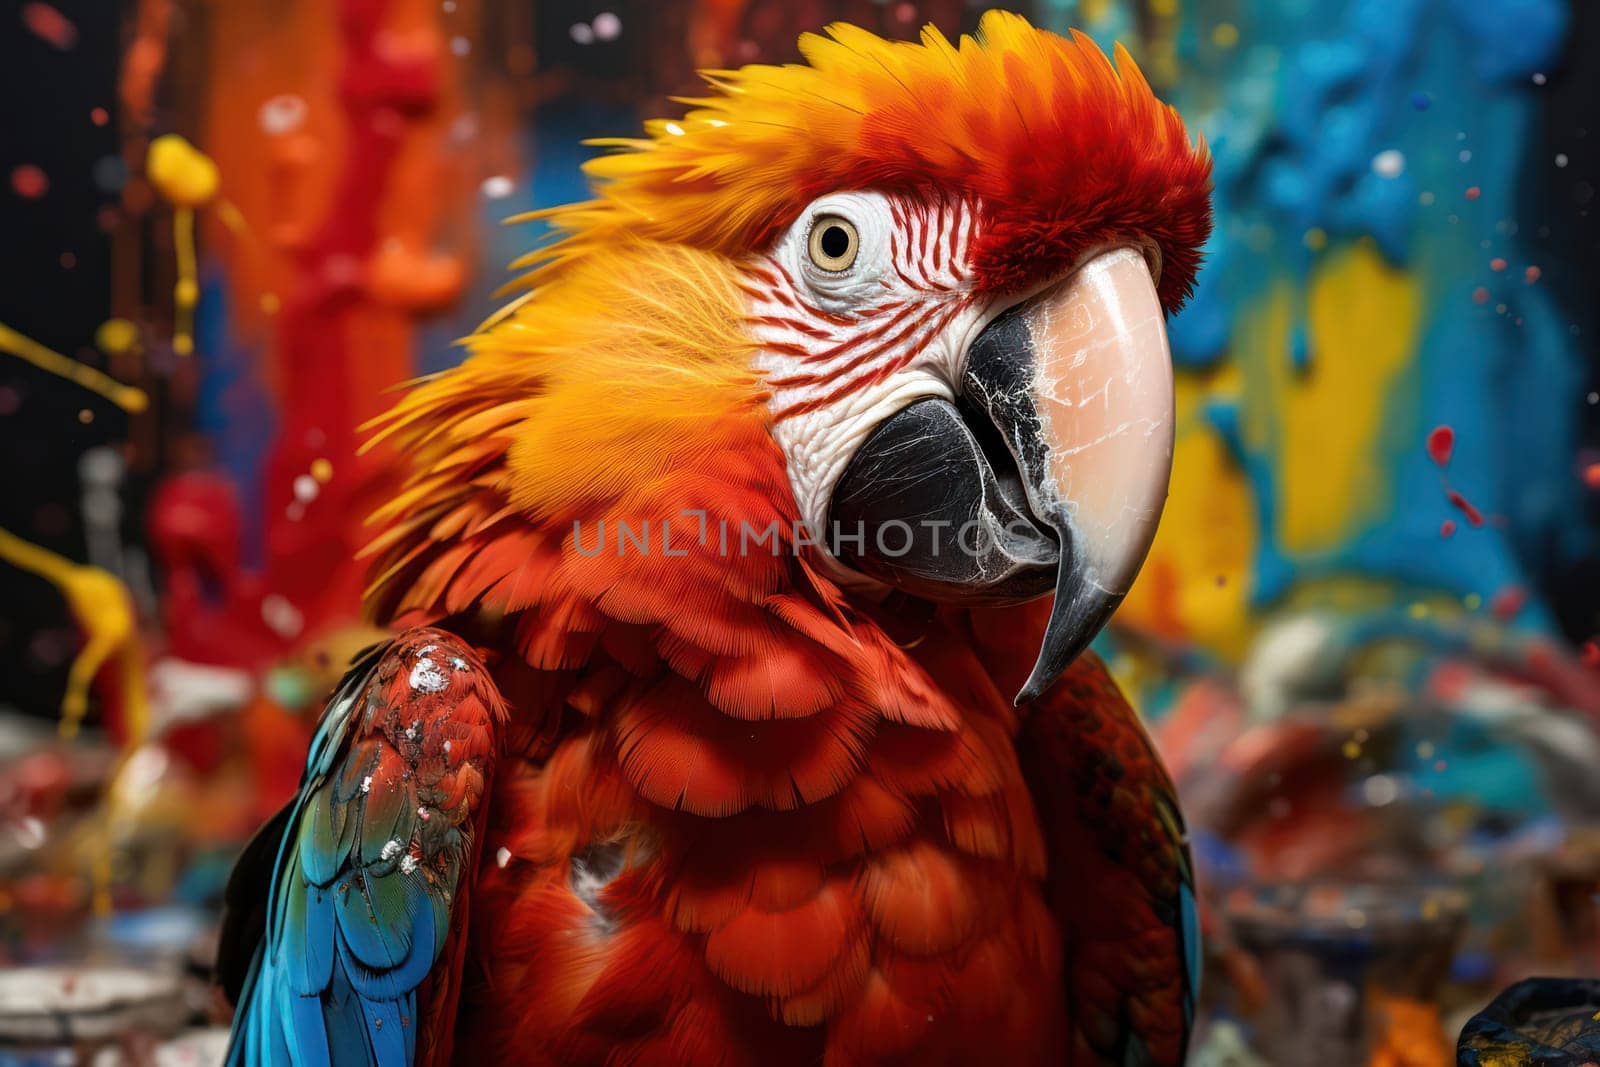 Vibrant Exotic Beauty: Close-up Portrait of a Red and Green Macaw, a Stunning Tropical Bird with Bright Feathers, in a Colorful Jungle Background by Vichizh